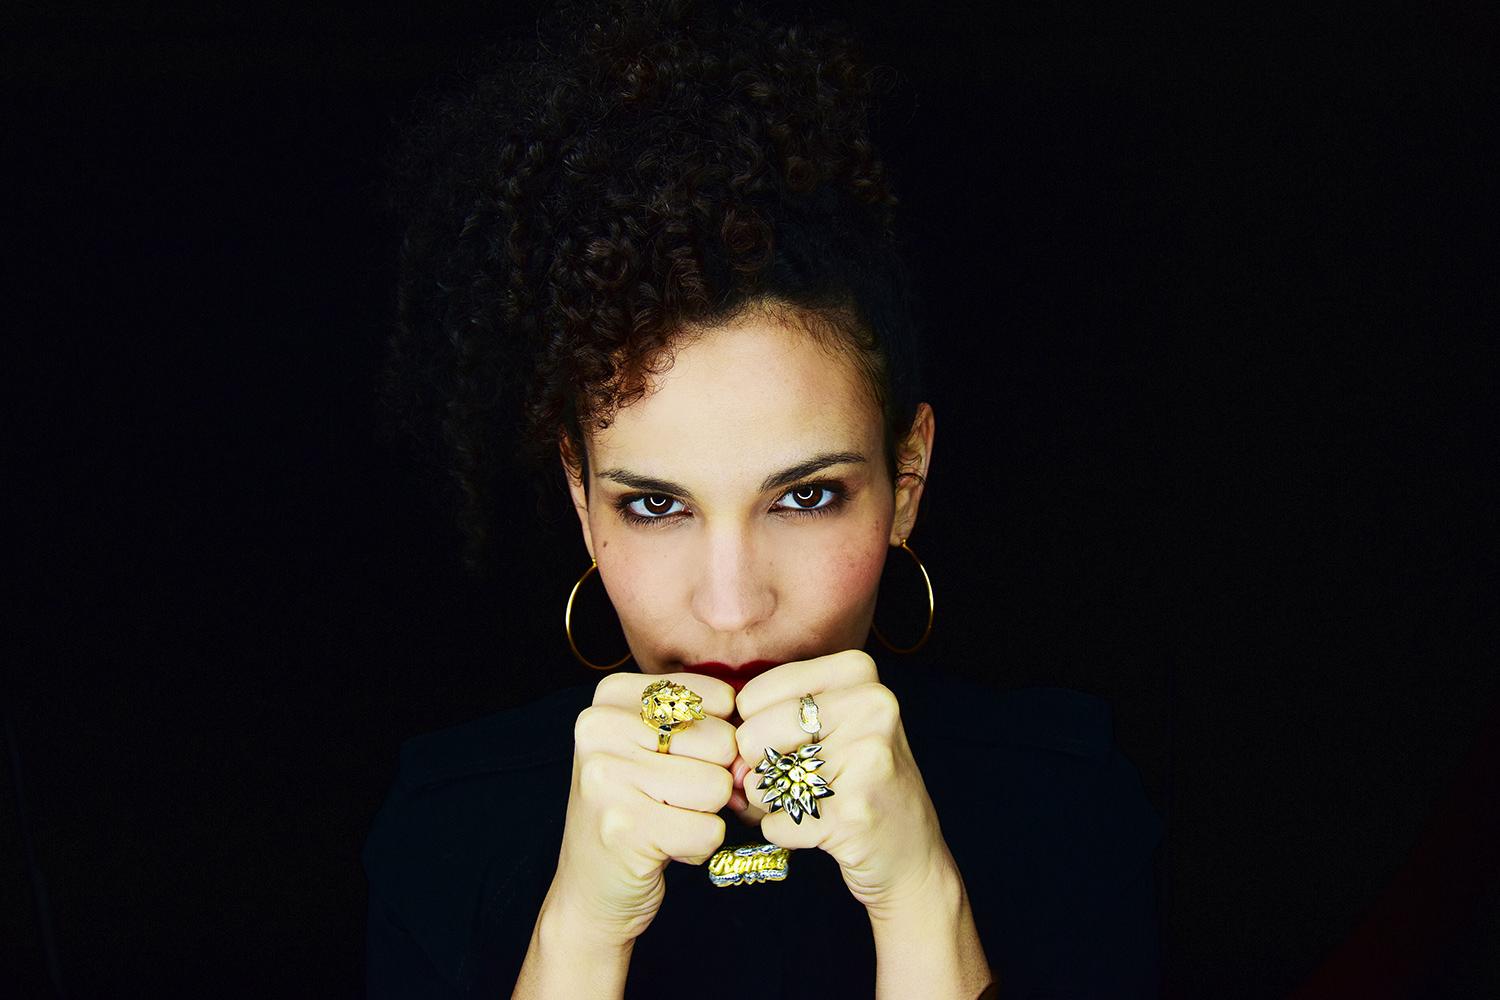 NEWS: Xenia Rubinos announces one of her first UK dates